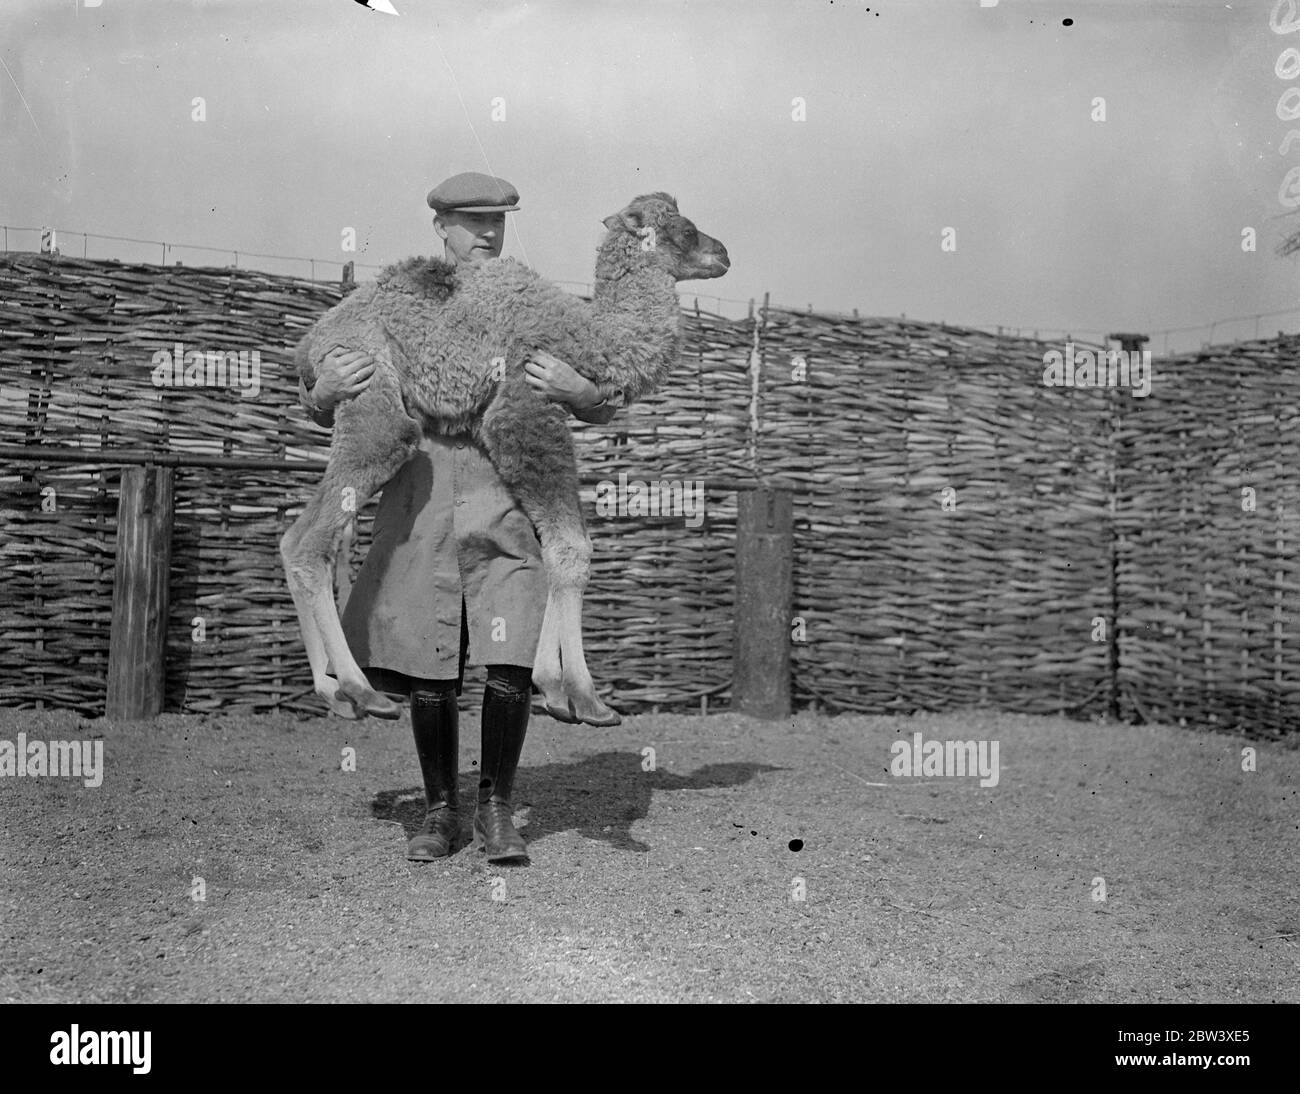 Whipsnade Zoo is rejoicing in the birth of its first baby camel, Hallelujah. The baby, which has born to Fattama, has two humps. The parents were brought from the Morocco Zoo last September. Photo shows: Hallelujah being nursed by her keeper, at Whipsnade. 31 March 1937 Stock Photo